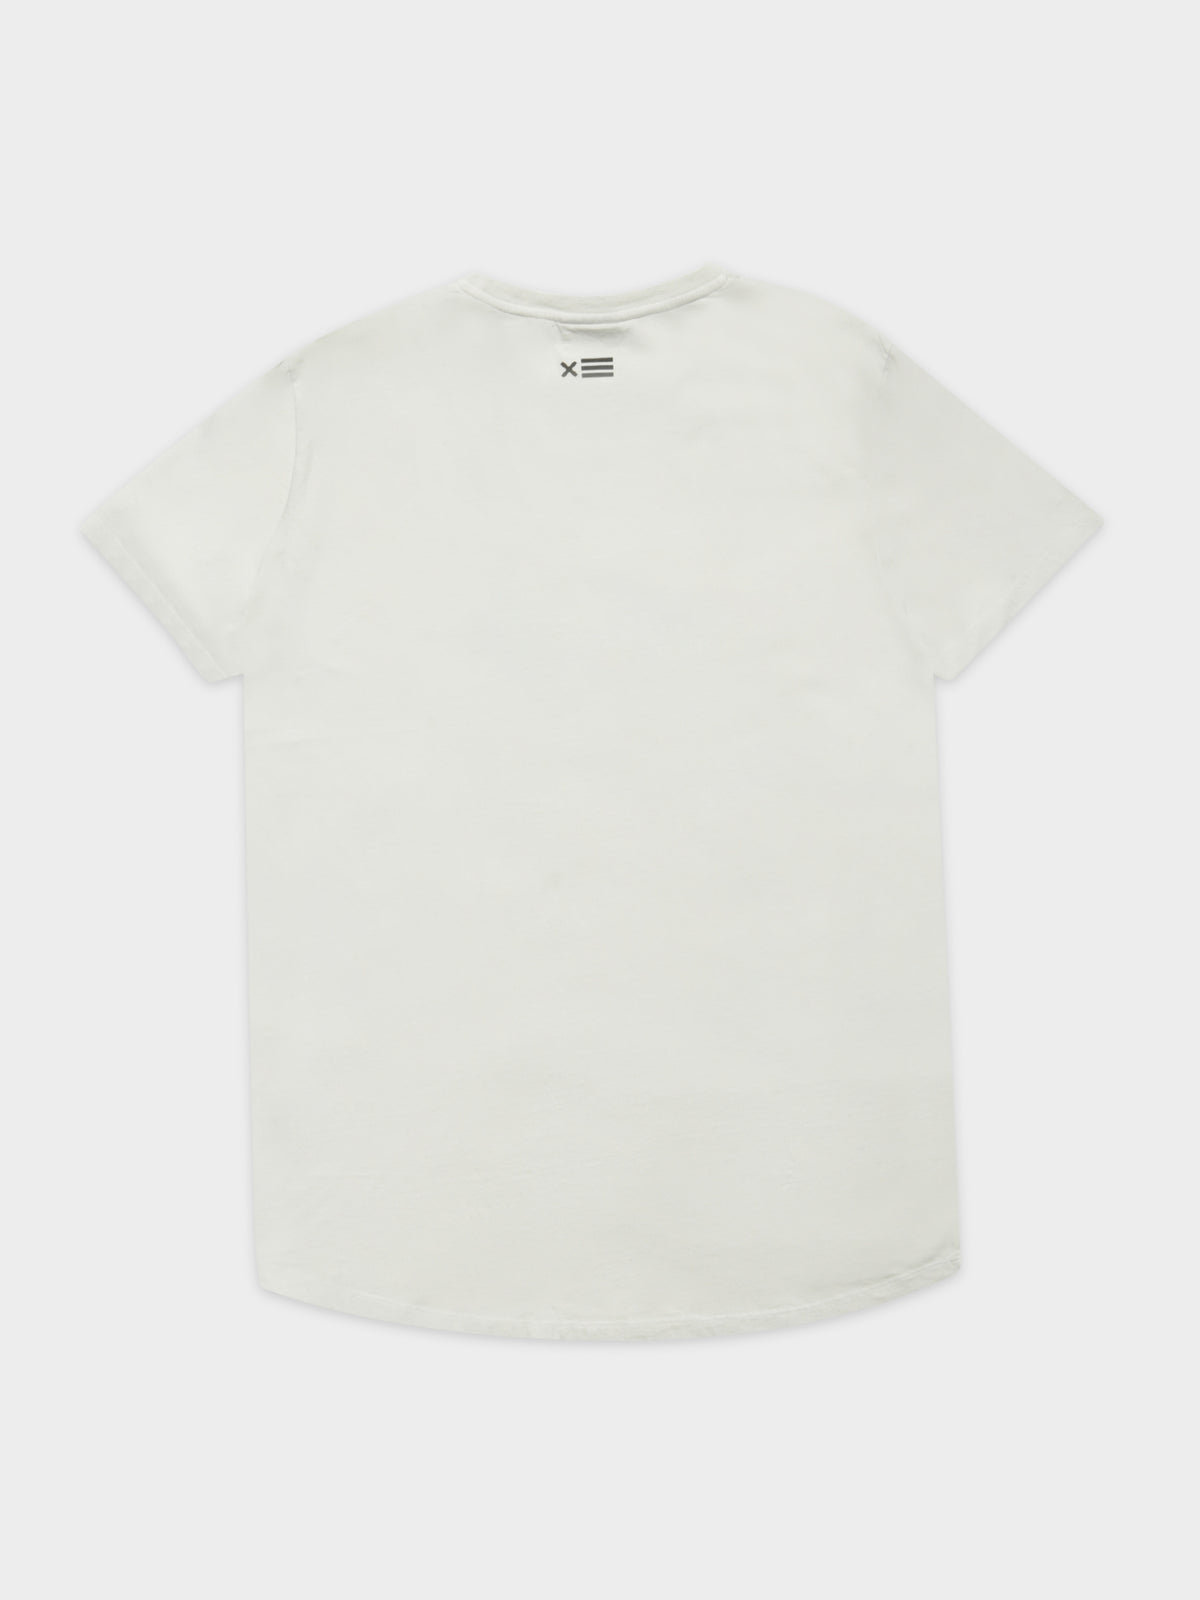 Remington Scoop Back T-Shirt in Pigment Off White